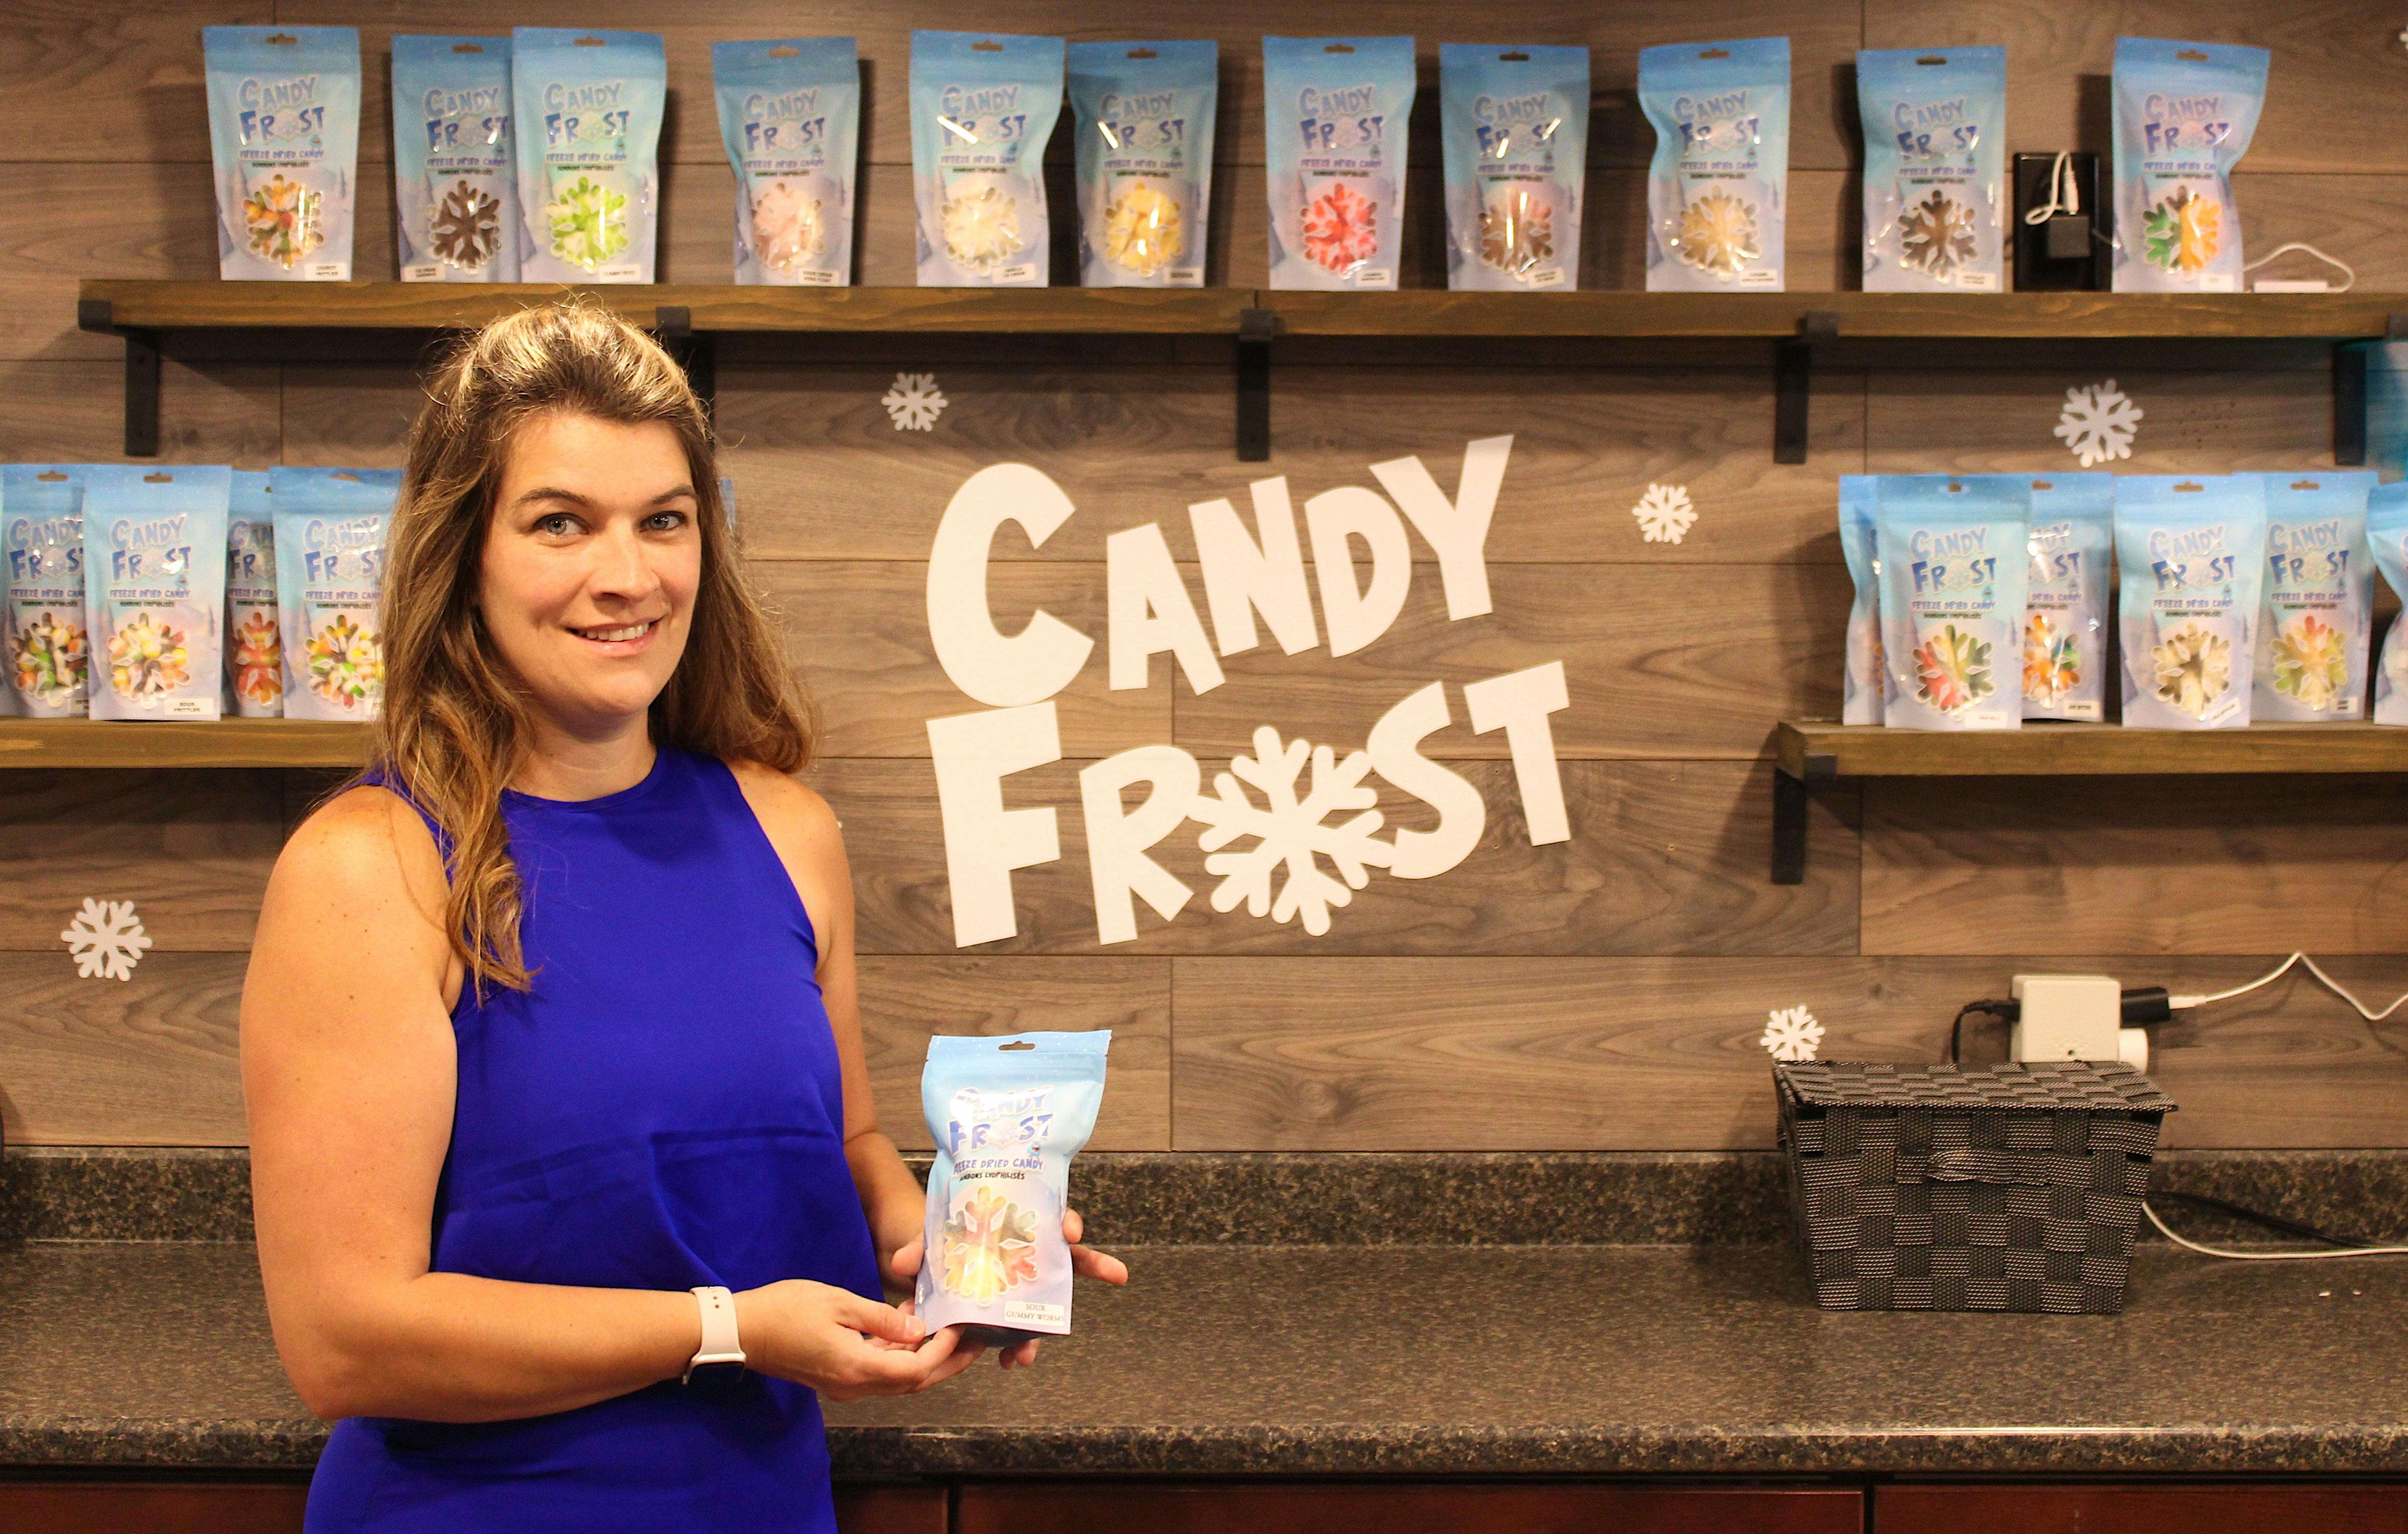 Western P.E.I. business makes, sells freeze-dried candy